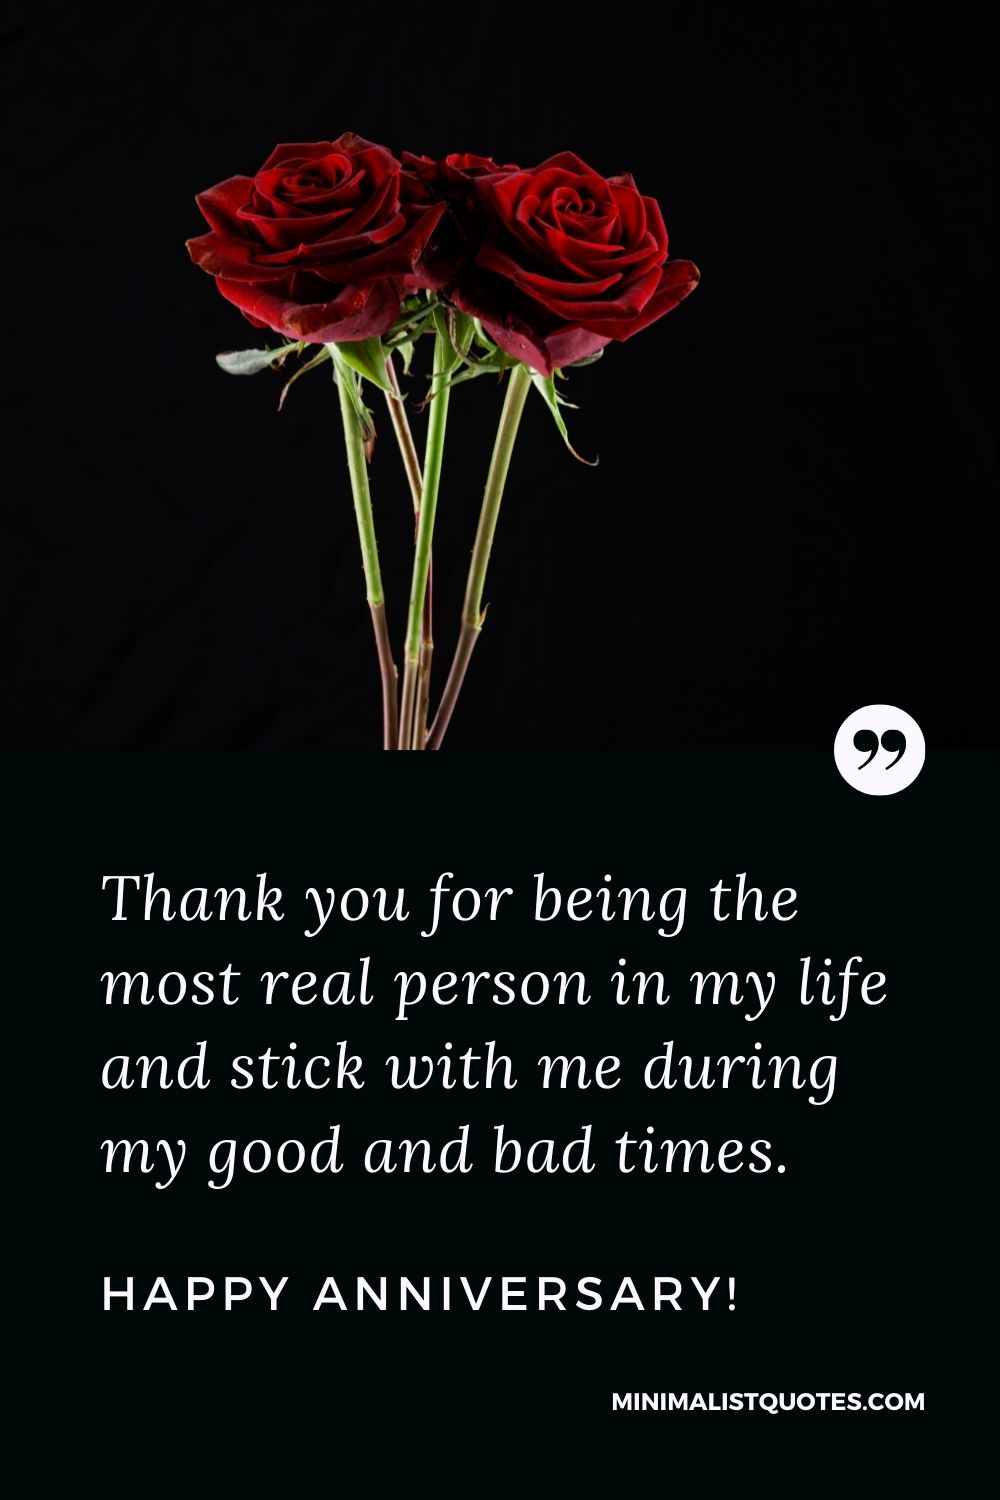 Anniversary Quote, Wish & Message With Image: Thank you for being the most real person in my life and stick with me during my good and bad times. Happy Anniversary!